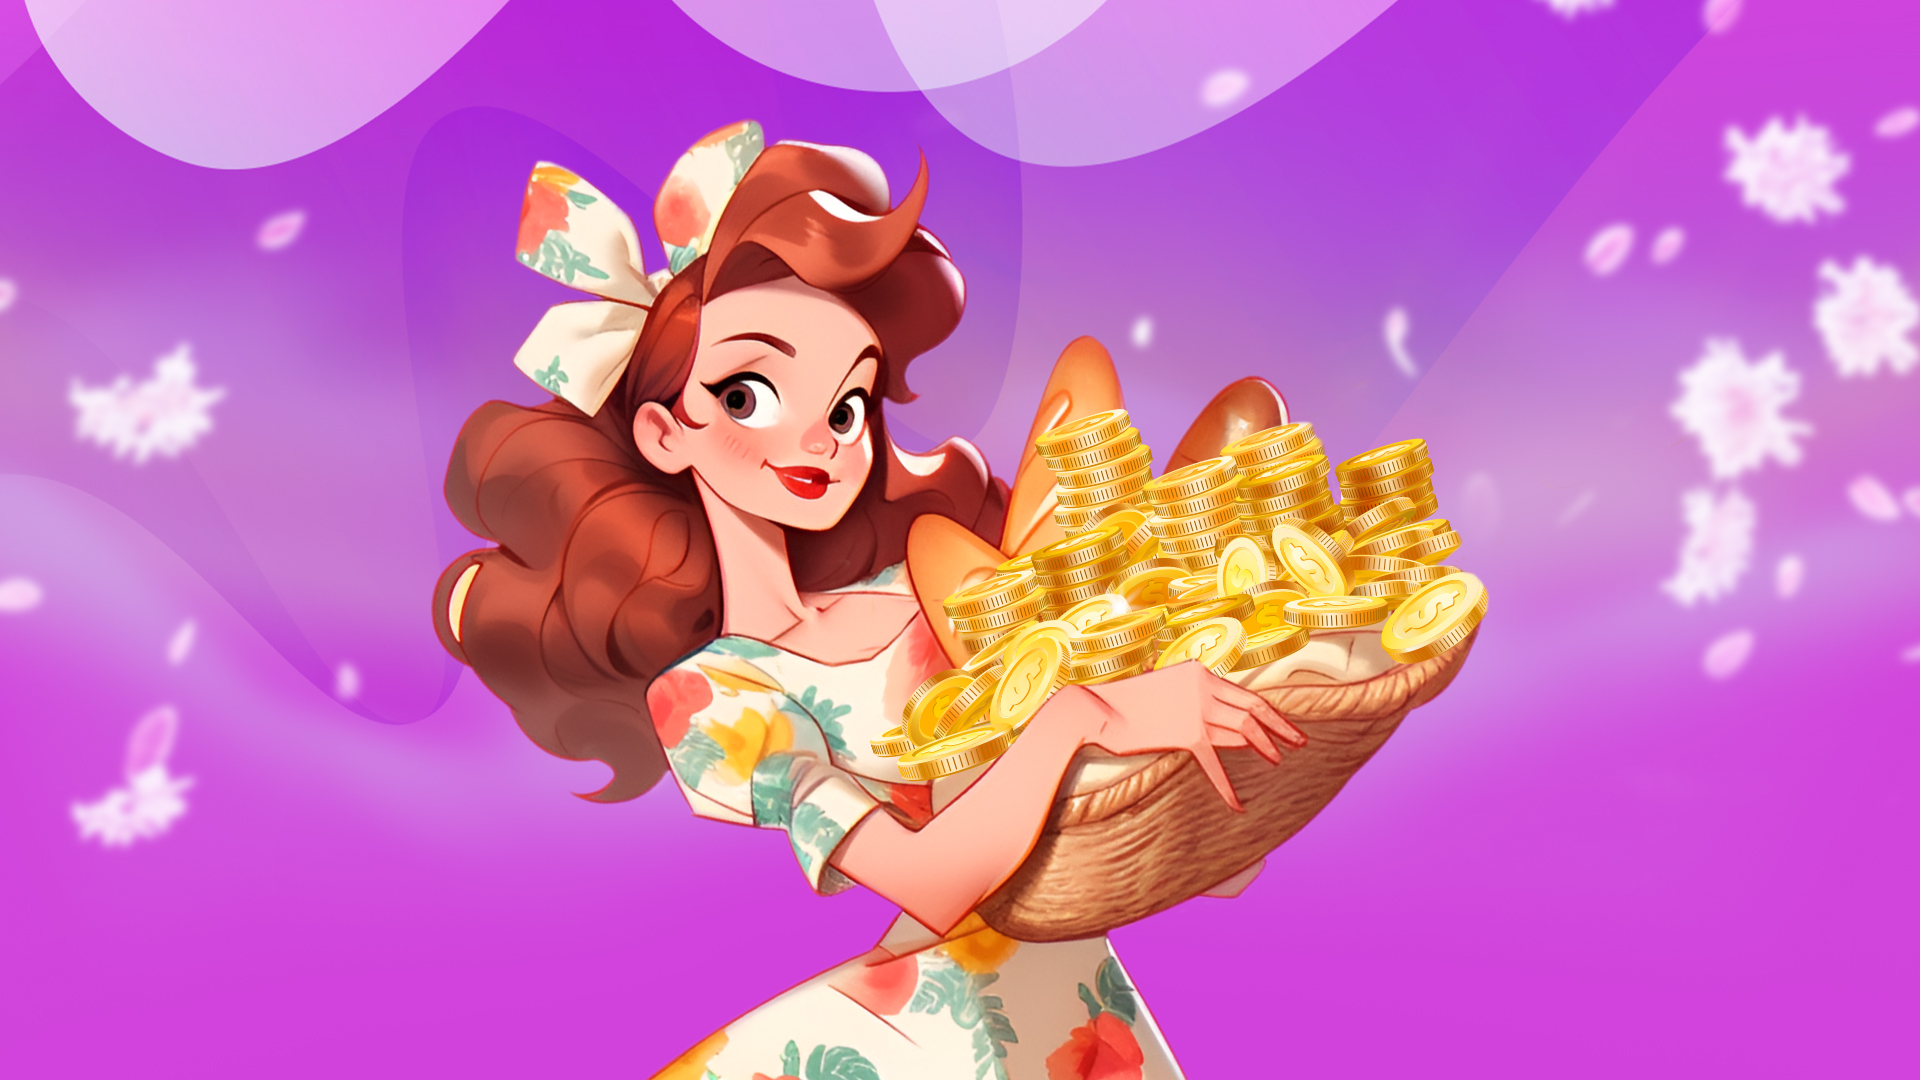 Woman with long red hair holds a basket full of gold coins against a purple background.